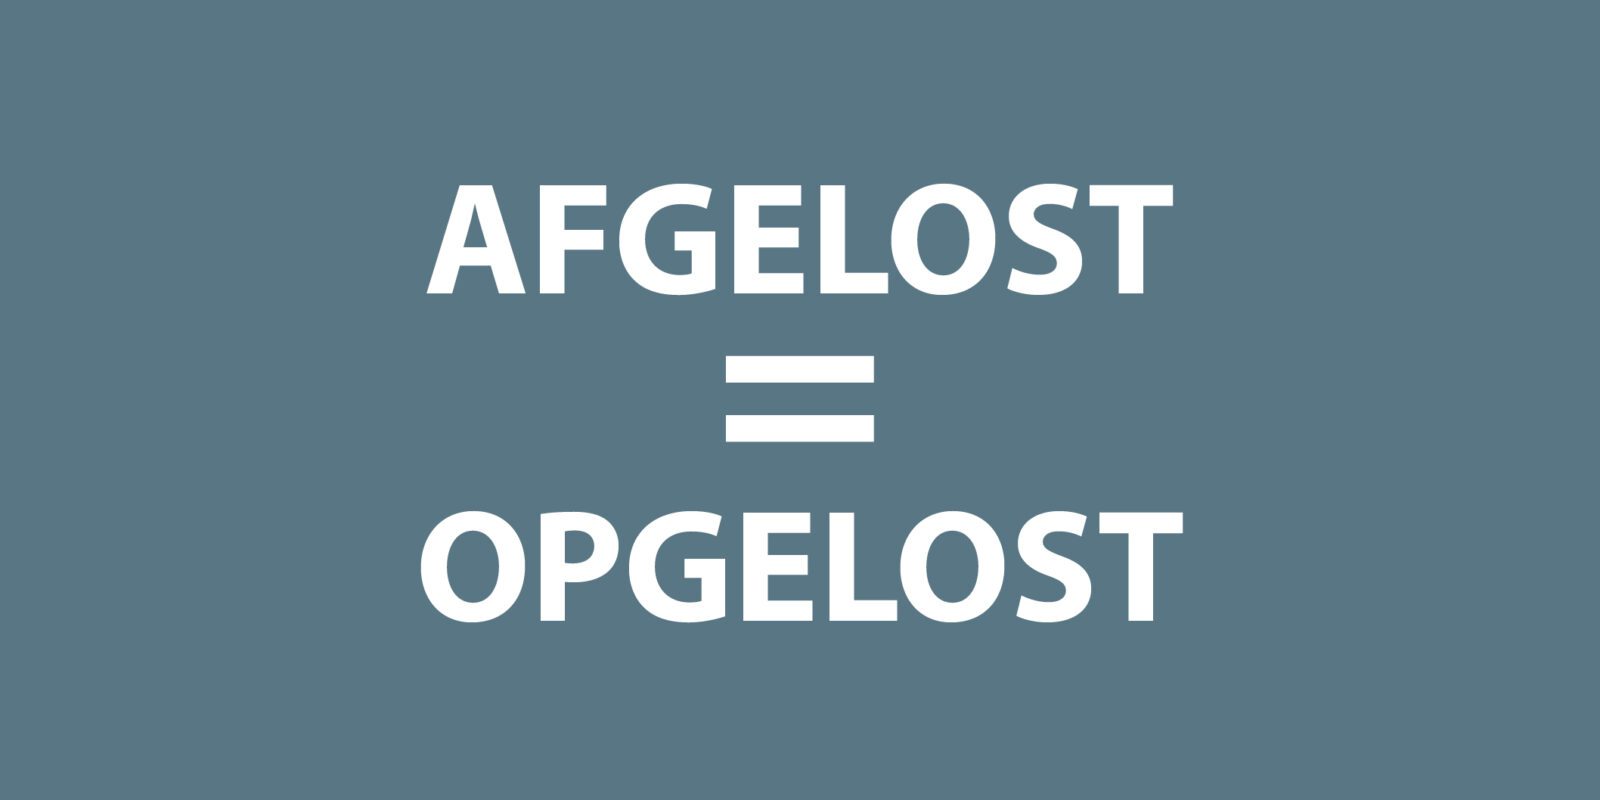 Image about Afgelost = Opgelost.